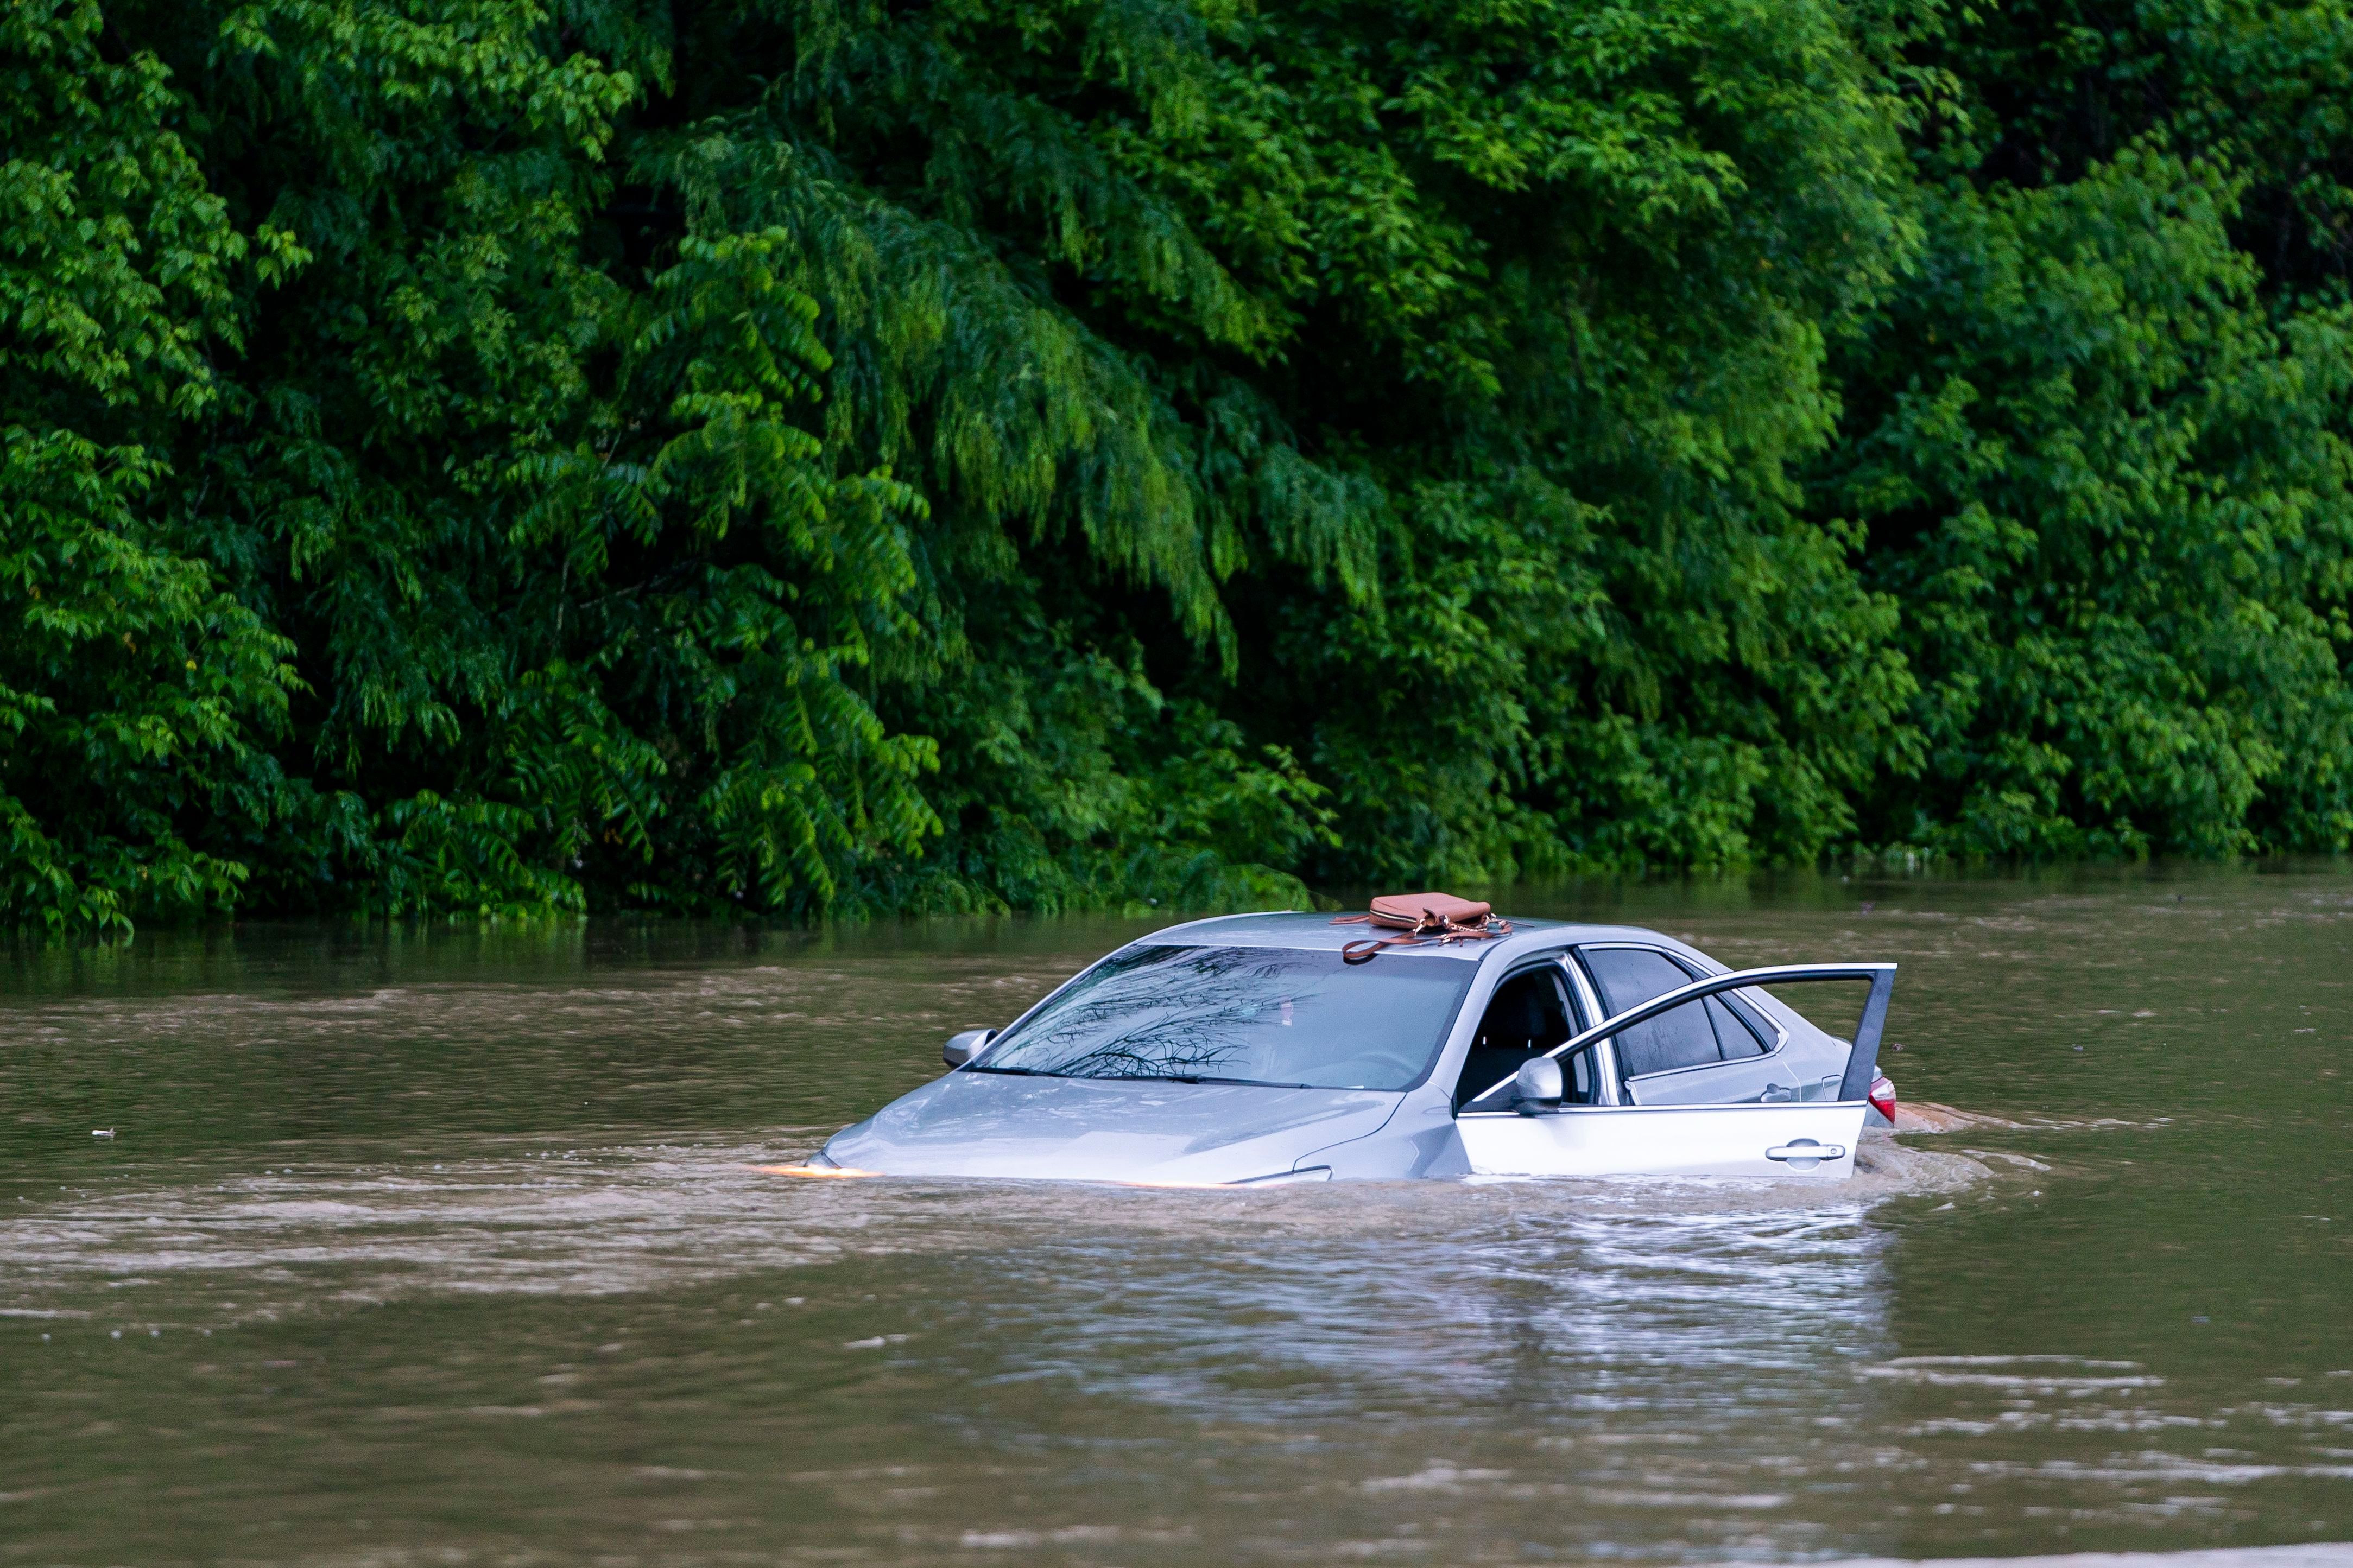 A flooded car on Columbia Pike after a flash flood in Oakland Mills, Maryland, USA, 27 May 2018. The National Weather Service stated as much as 9.5 inches of rain fell in the area. Flash floods ravage Maryland, Oakland Mills, USA - 27 May 2018 (JIM LO SCALZO—EPA-EFE/REX/Shutterstock)